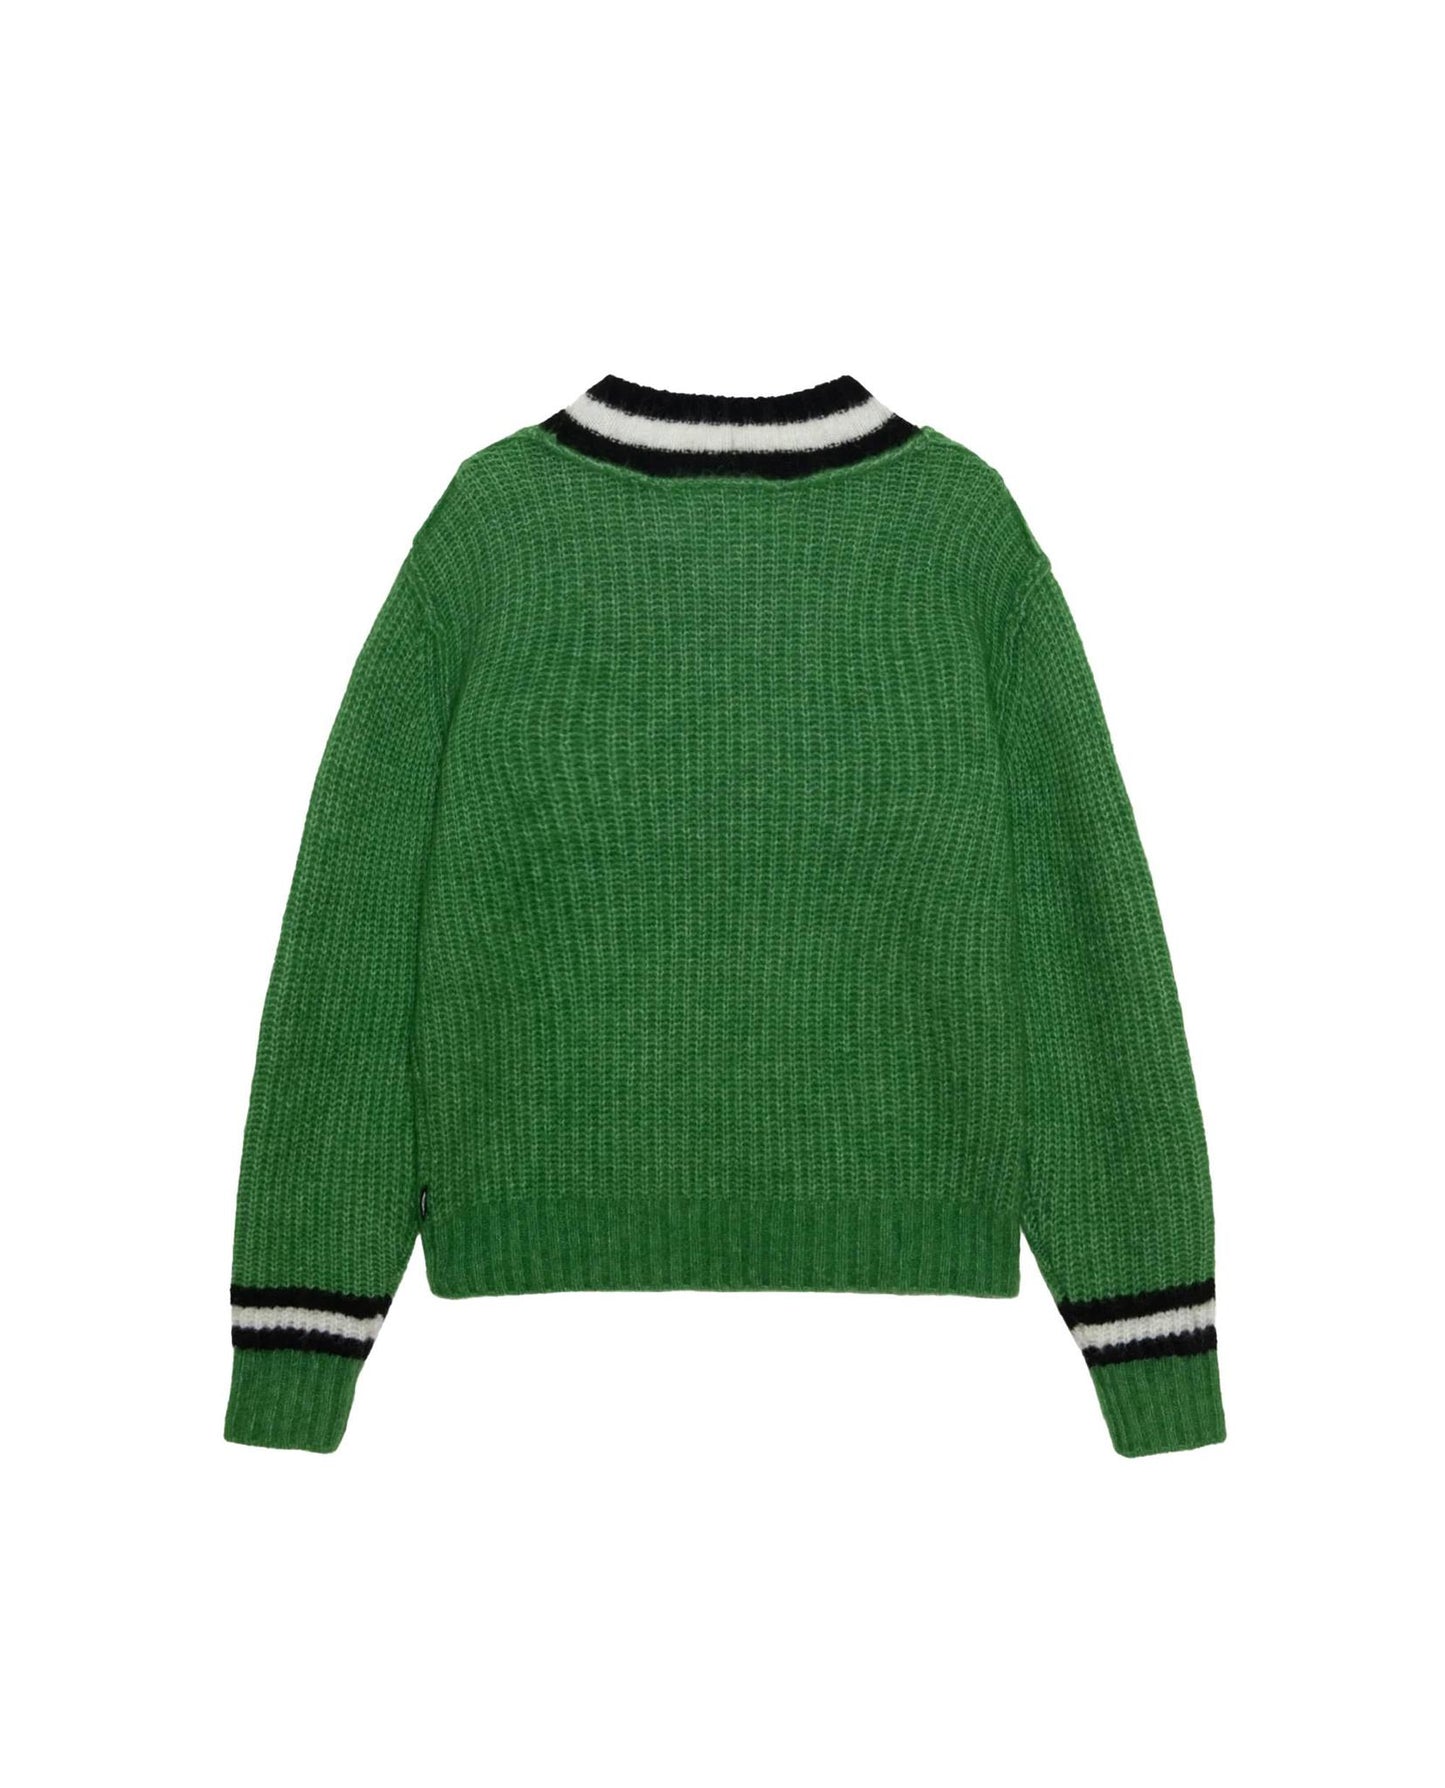 Stussy Mohair Tennis Sweater | STASHED